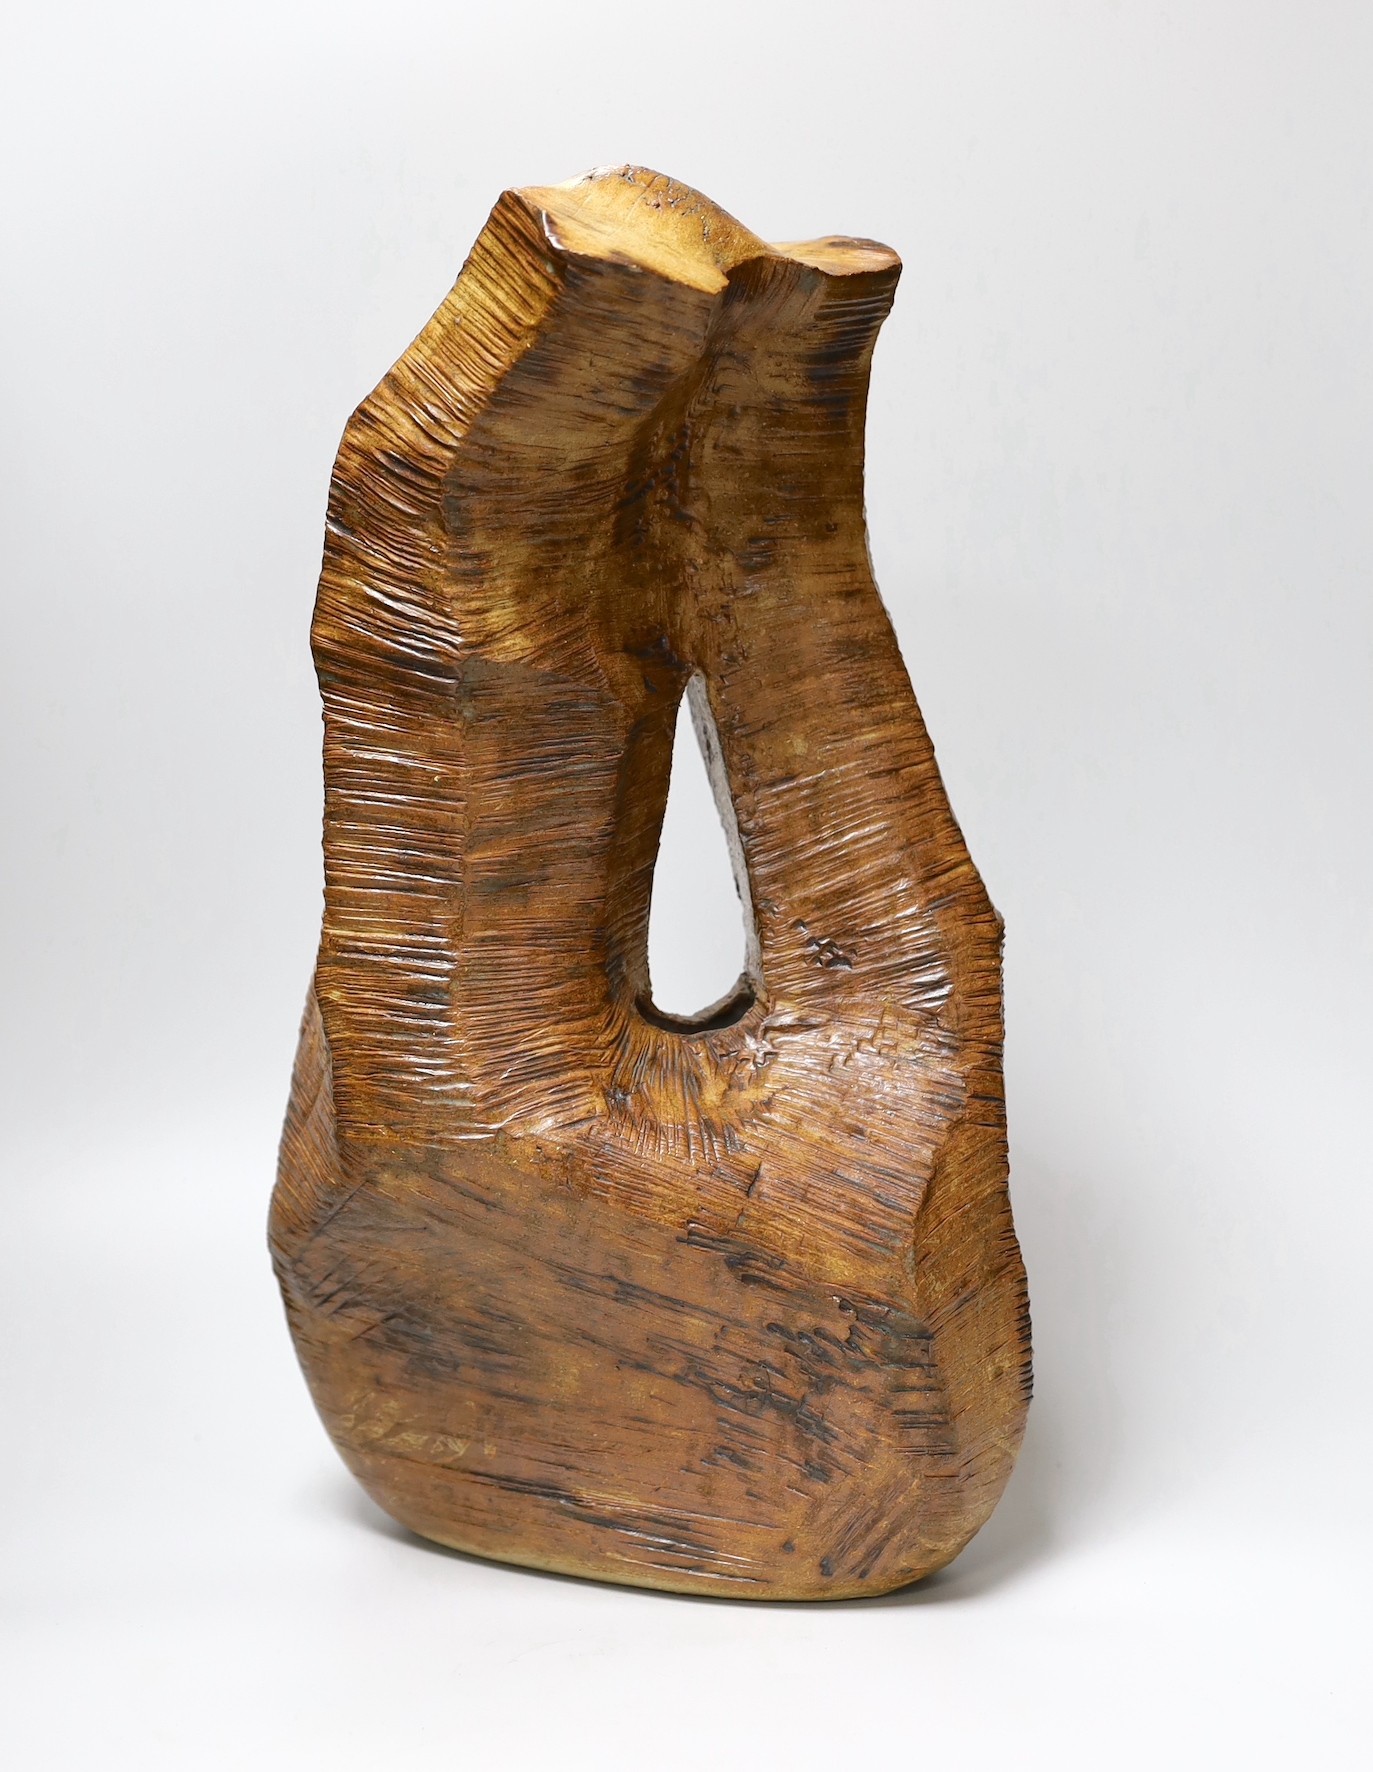 Ruth Sulke - a large brown copper glazed stoneware angular “wooden” sculpture with central hole, 1985, 42cm, See Sulke, Ruth - Ceramic Sculpture by Ruth Sulke, Hanart 2 Gallery, 1987, page 30